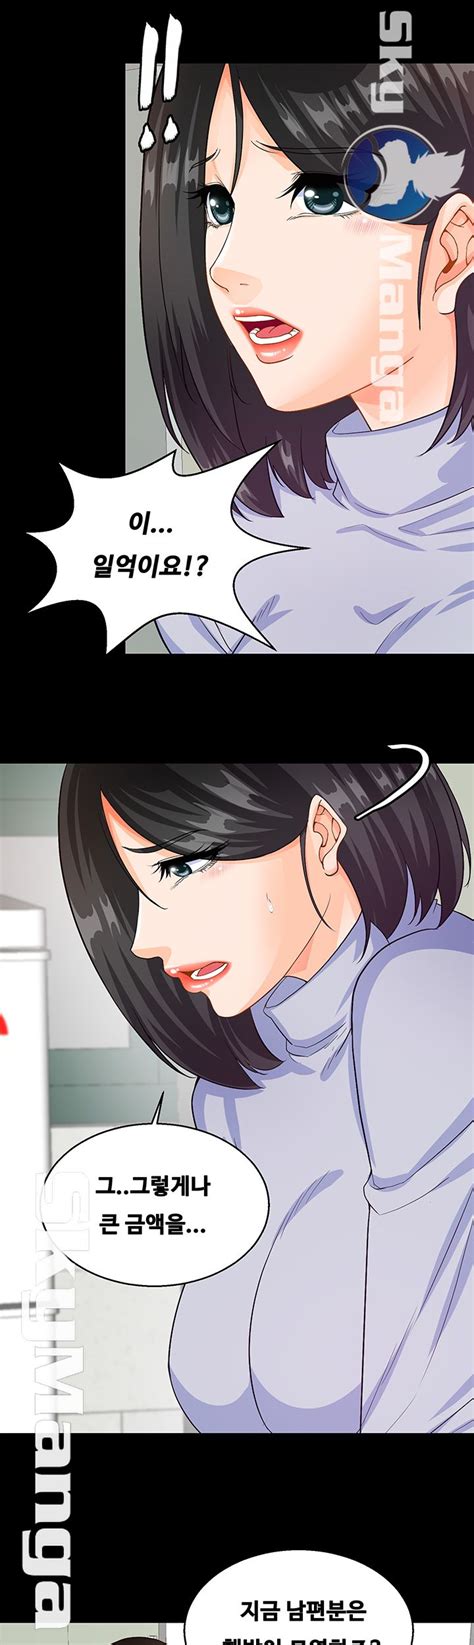 Manhwa reading free online on mangaeffect. Live with her raw - Capitulo 21 - manhwa-raw